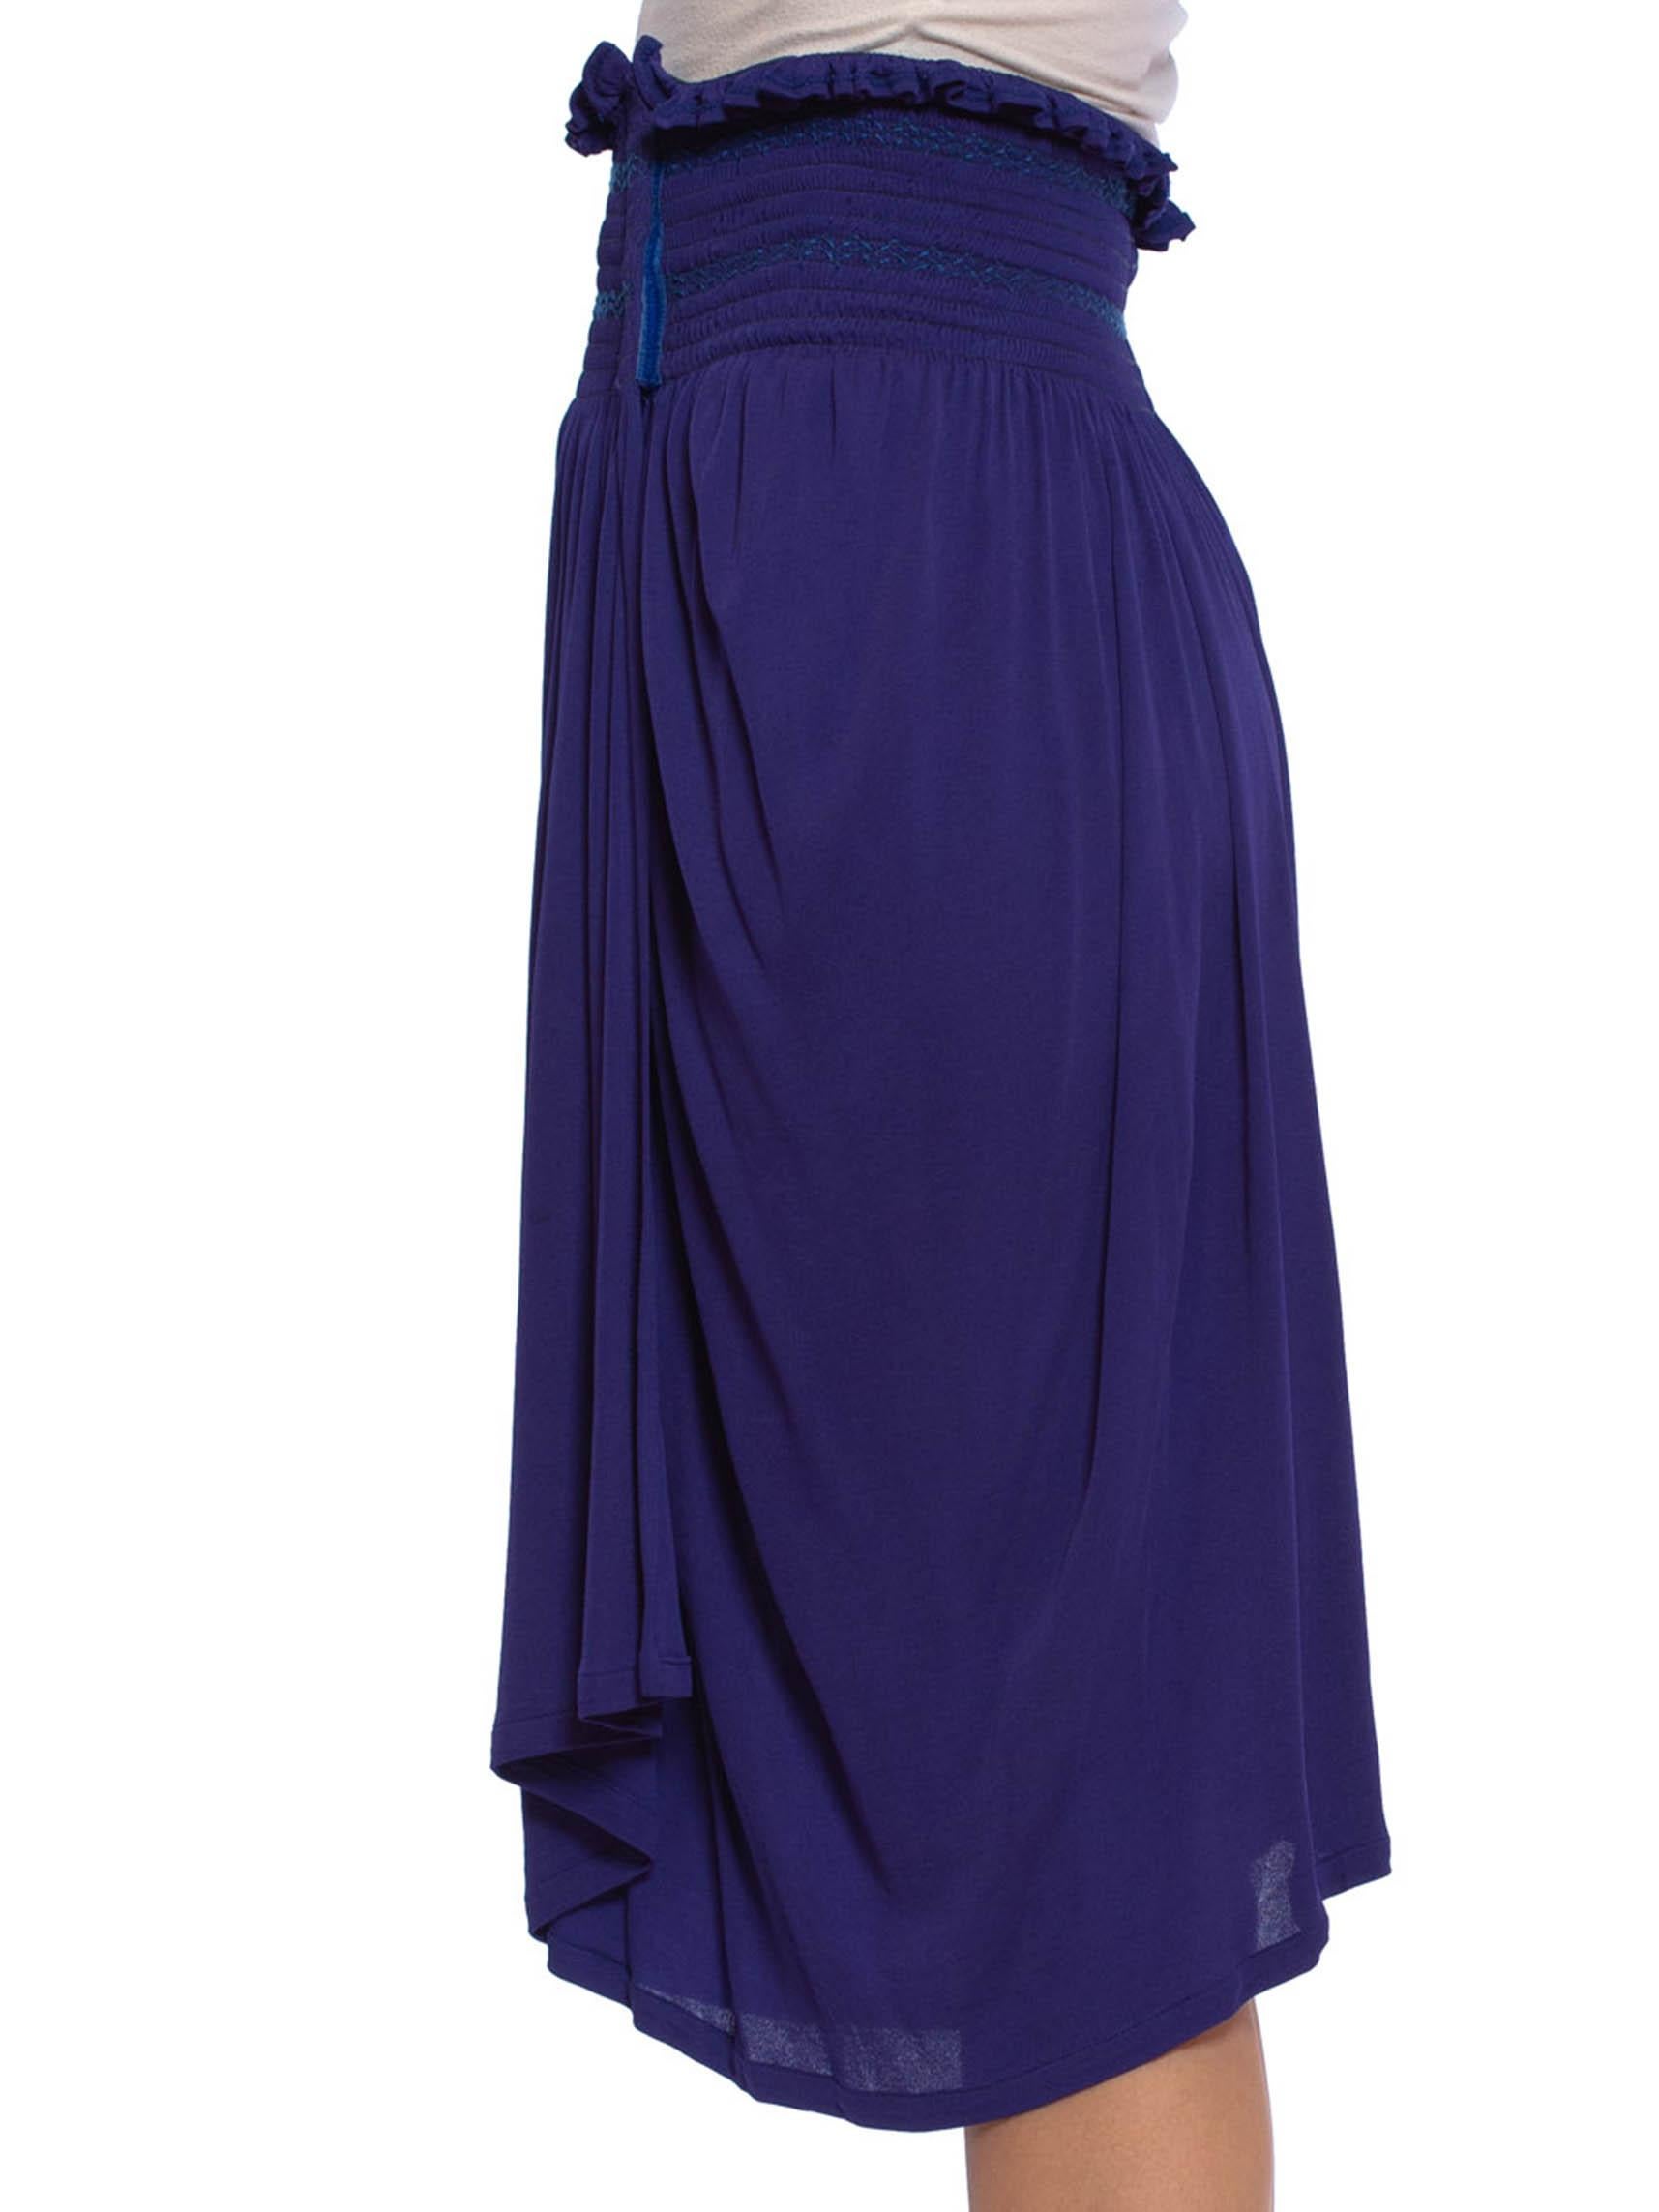 1990S KENZO Purple Blue Viscose Jersey Wrap Skirt With Smocked Waist In Excellent Condition For Sale In New York, NY